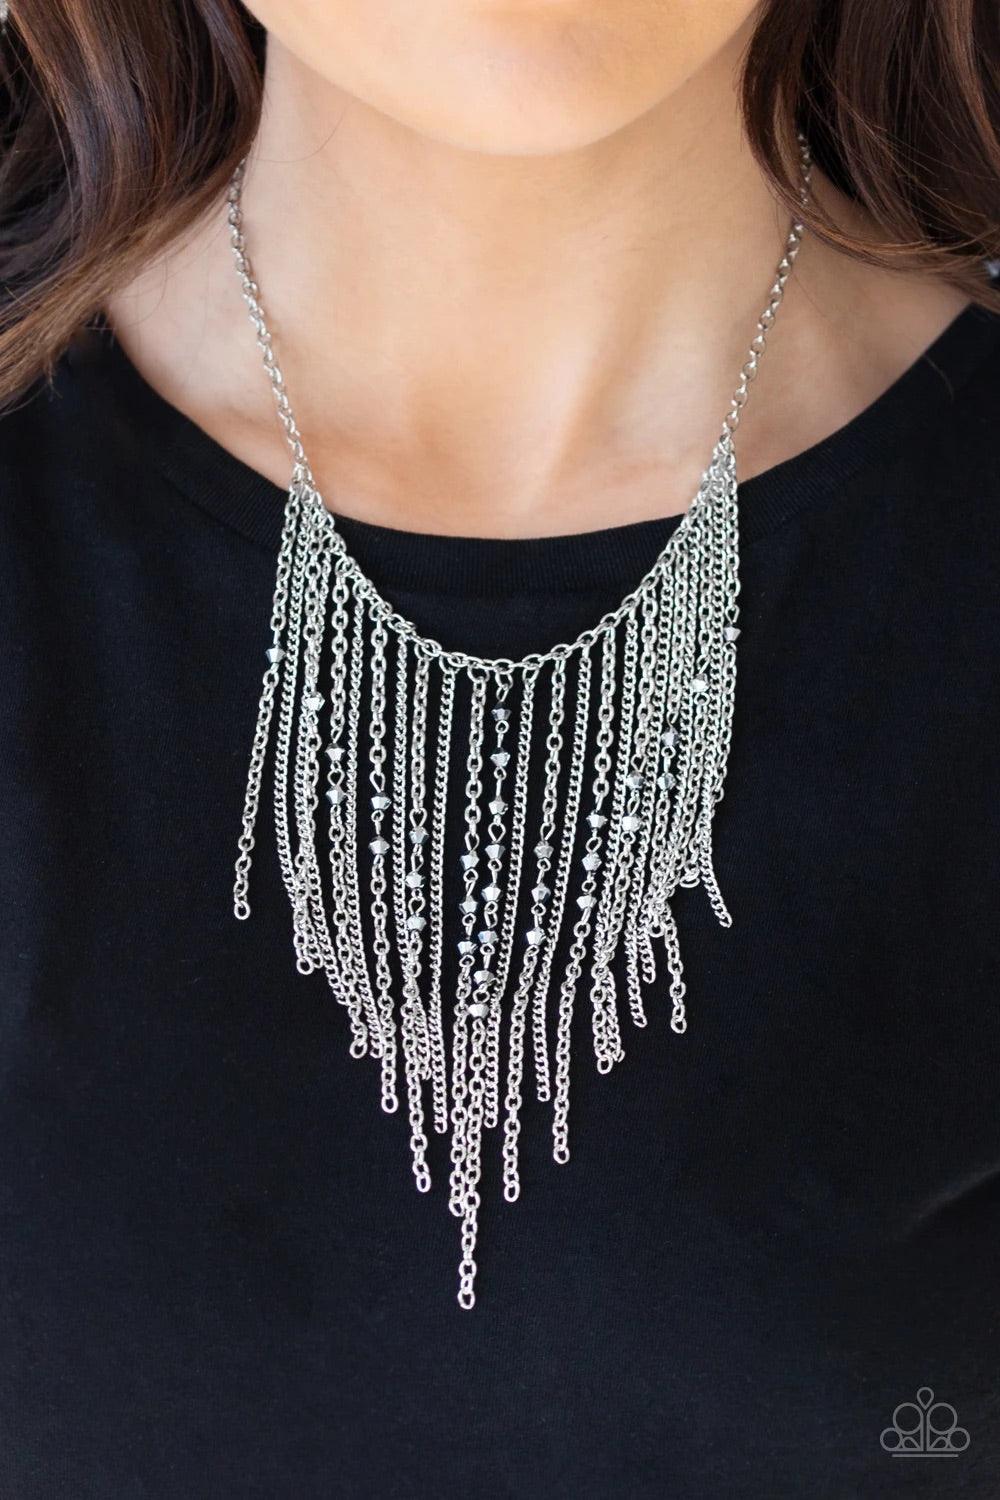 Paparazzi Accessories First Class Fringe - Silver Varying in length, mismatched silver chains stream from the bottom of a classic silver chain. Faceted hematite crystal-like beads sporadically dot the free-falling chains, creating a statement-making fring